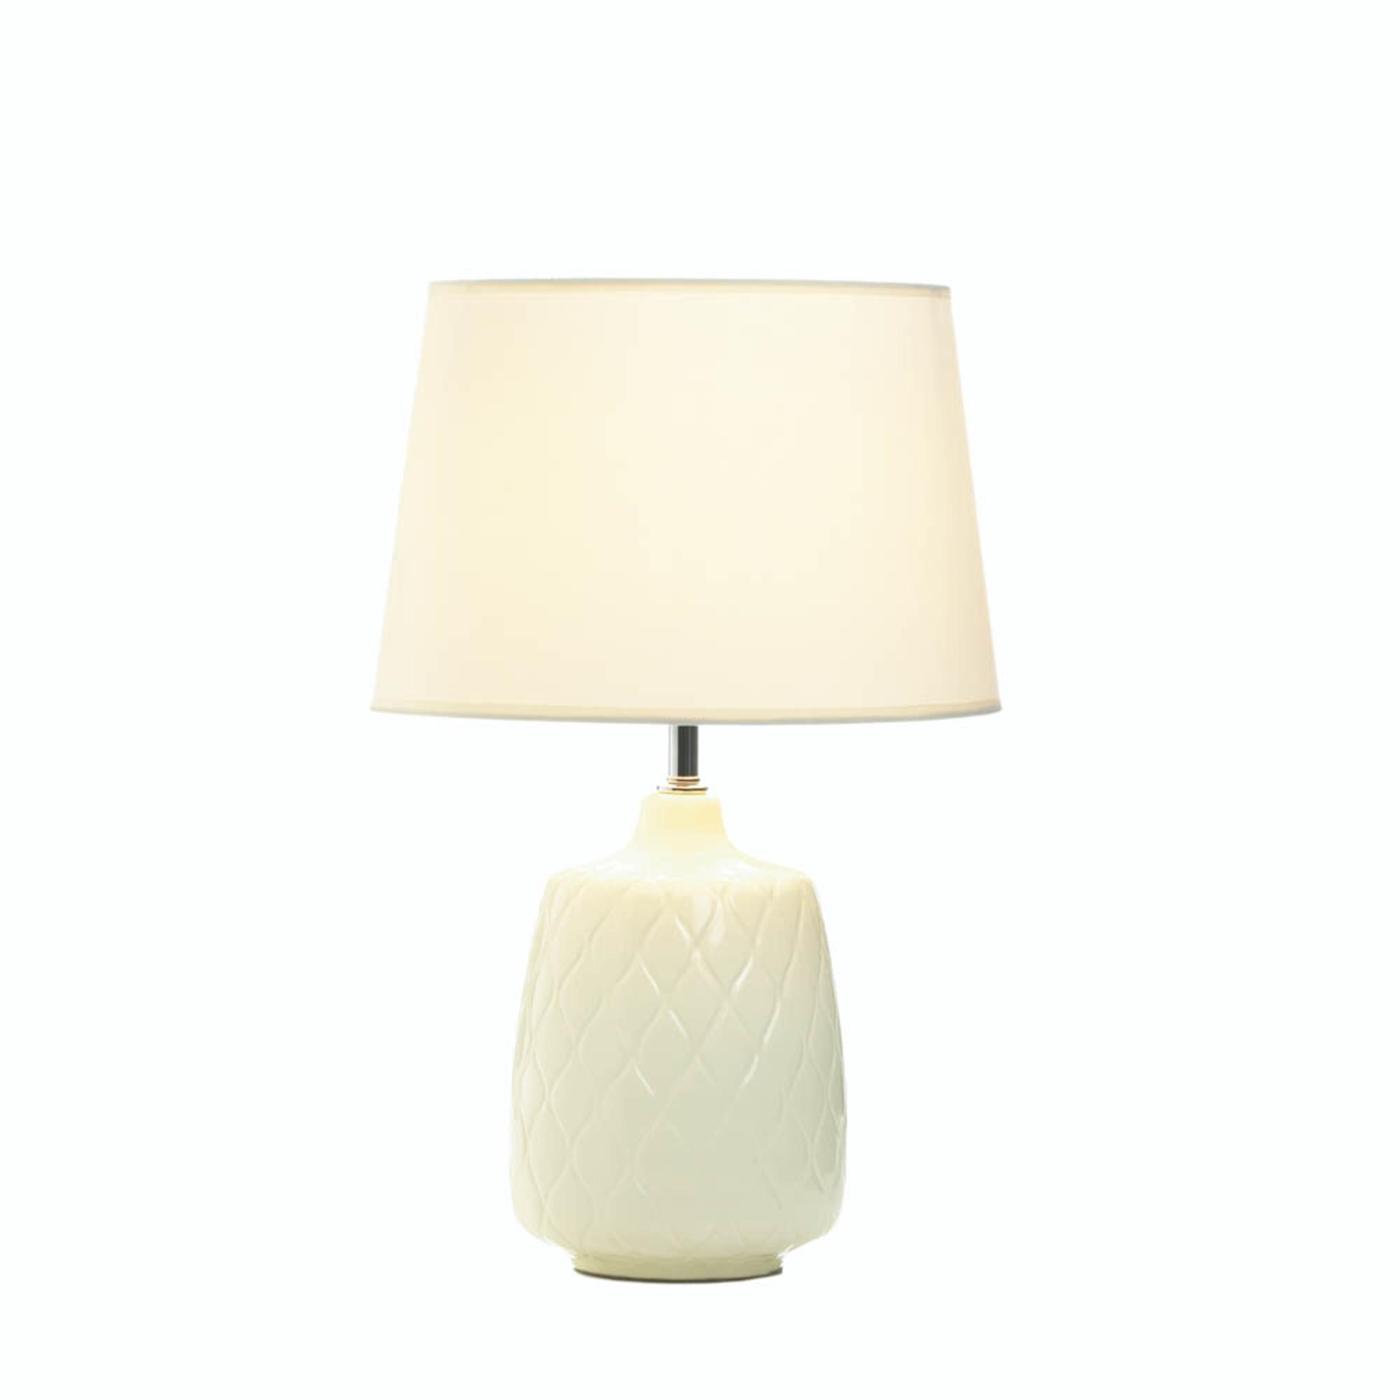 Quilted Diamonds Table Lamp